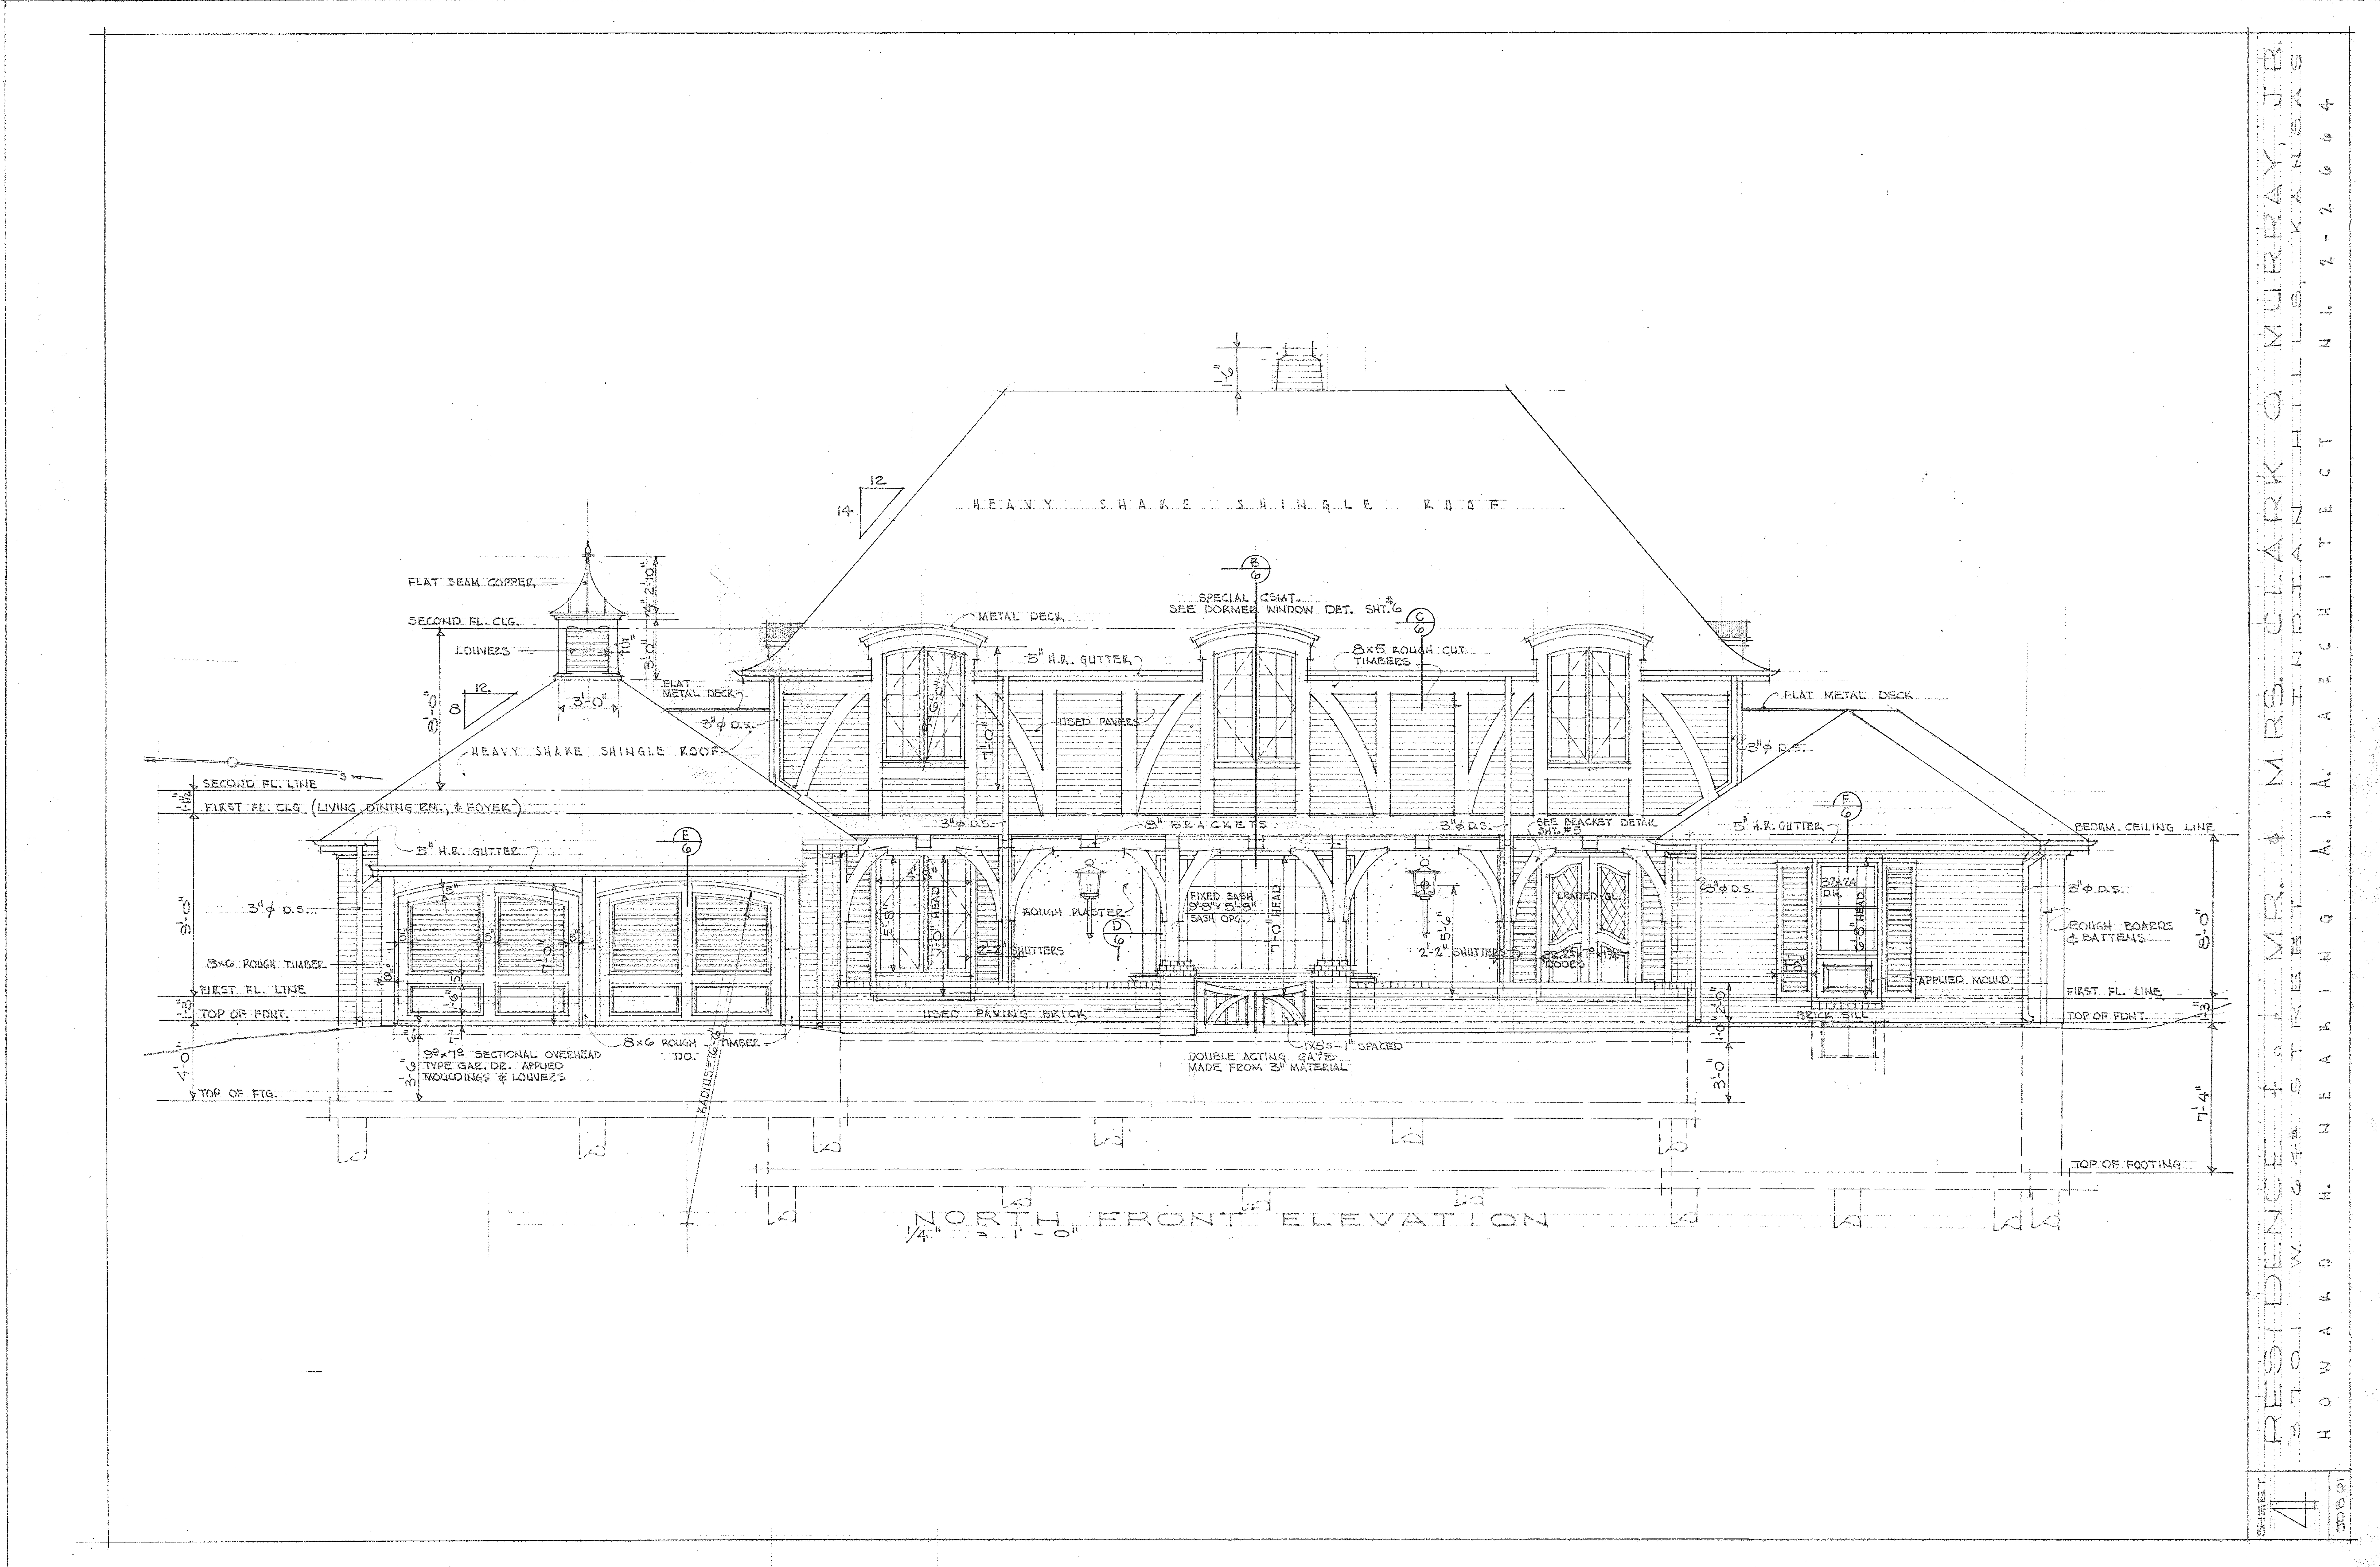 NSPJ Architects first job, a residential home sketch design